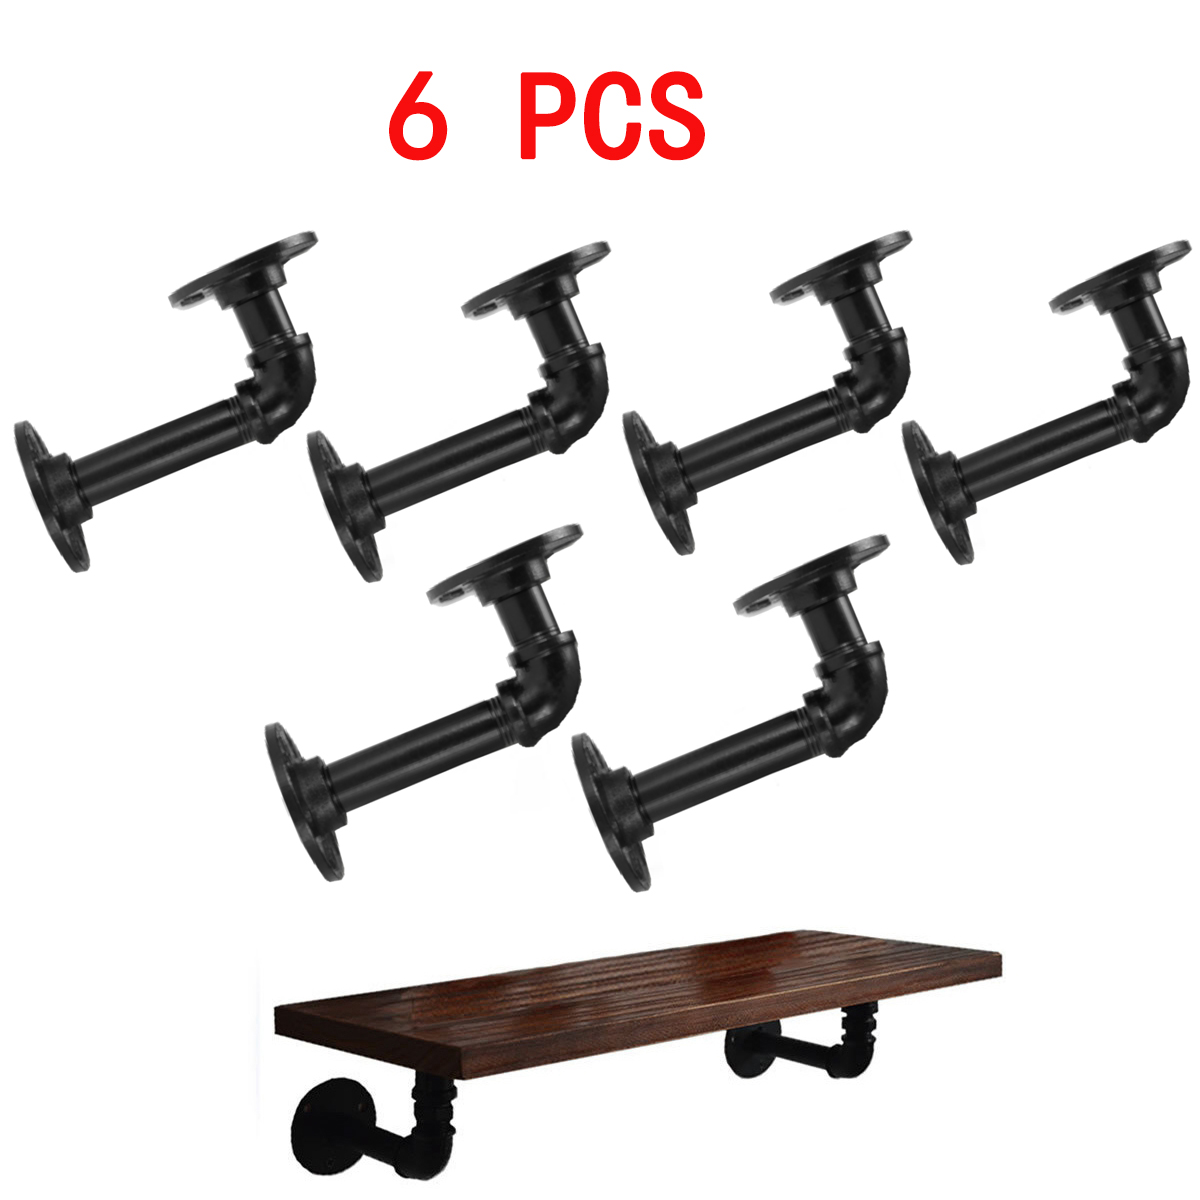 Novashion 6 Pack Industrial Pipe Shelf Brackets Flange Iron Metal Fittings DIY Shelves Vintage Furniture Wall Mounted Heavy Duty Decorative Rustic Shelving - image 1 of 10